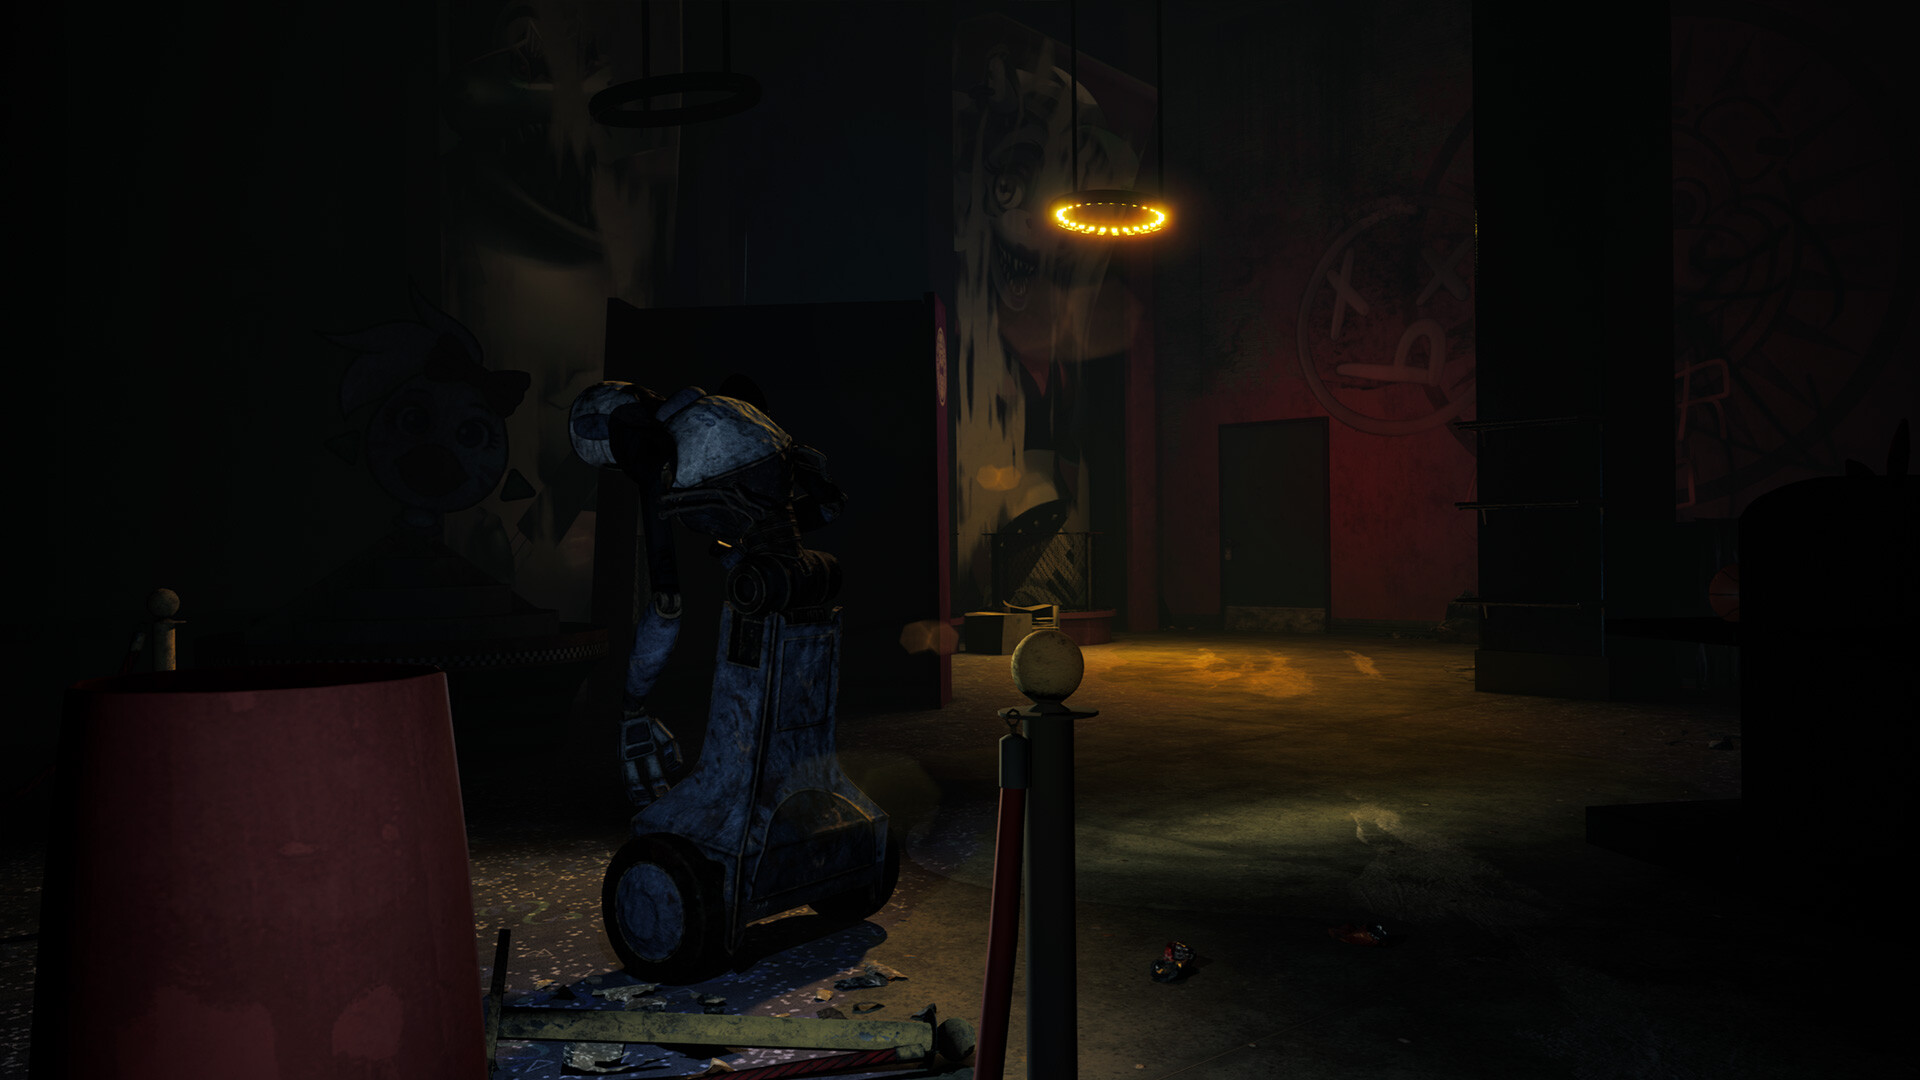 Five Nights at Freddy's Security Breach: RUIN by Some0neisnoton on